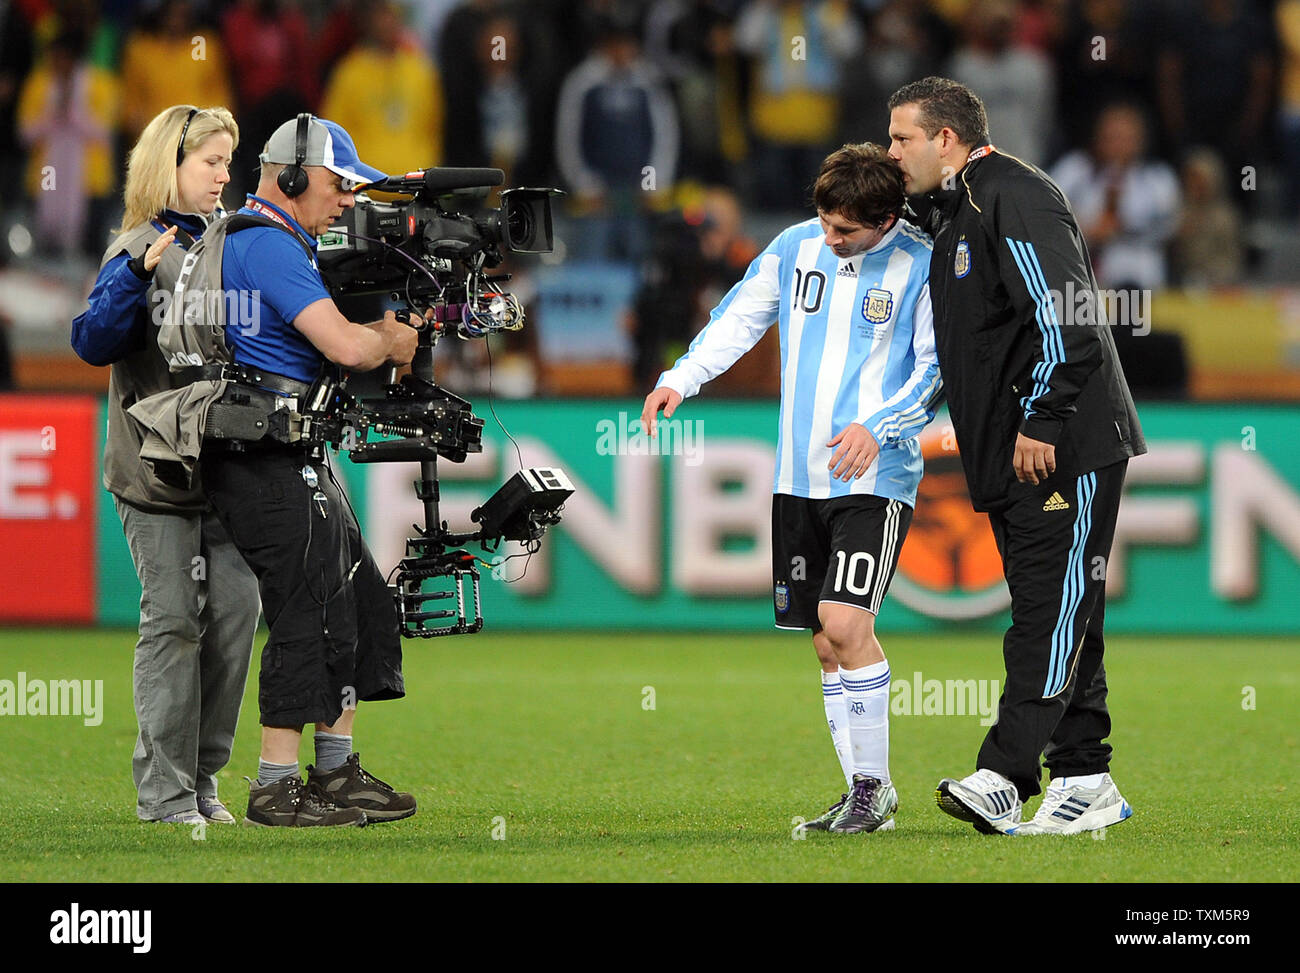 Lionel Messi of Argentina looks dejected as he leaves the field after the FIFA World Cup Quarter Final match at the Green Point Stadium in Cape Town, South Africa on July 3, 2010. Germany beat Argentina 4-0. UPI/Chris Brunskill Stock Photo